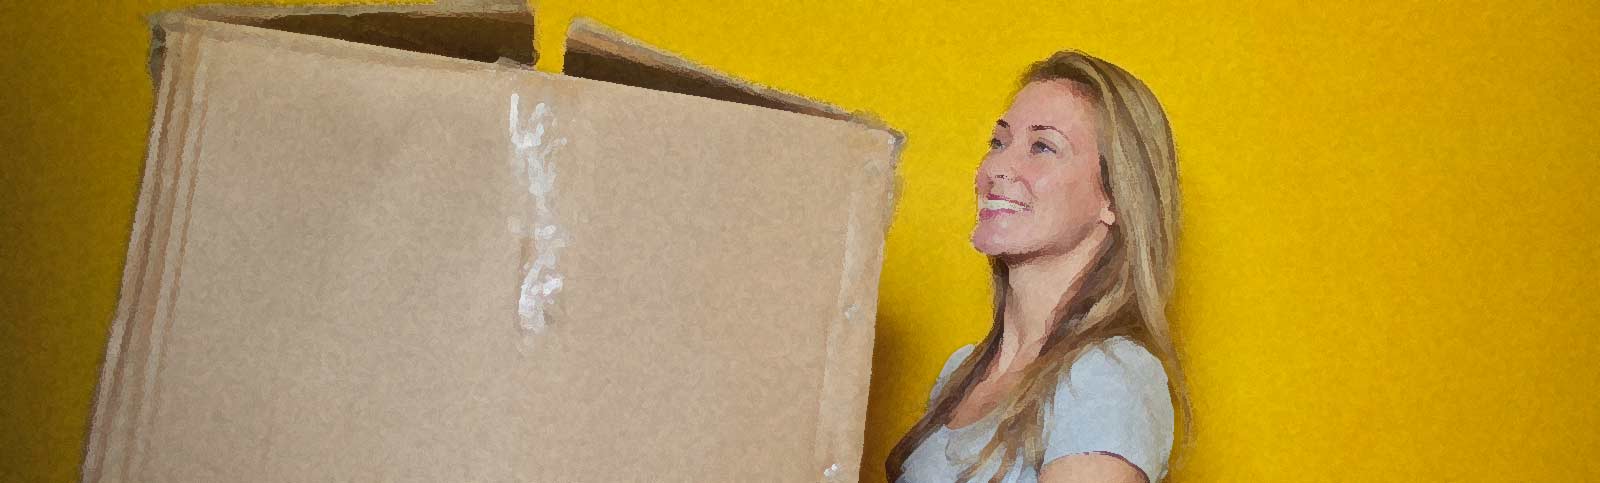 6 House Removal Tips To Save Time And Money